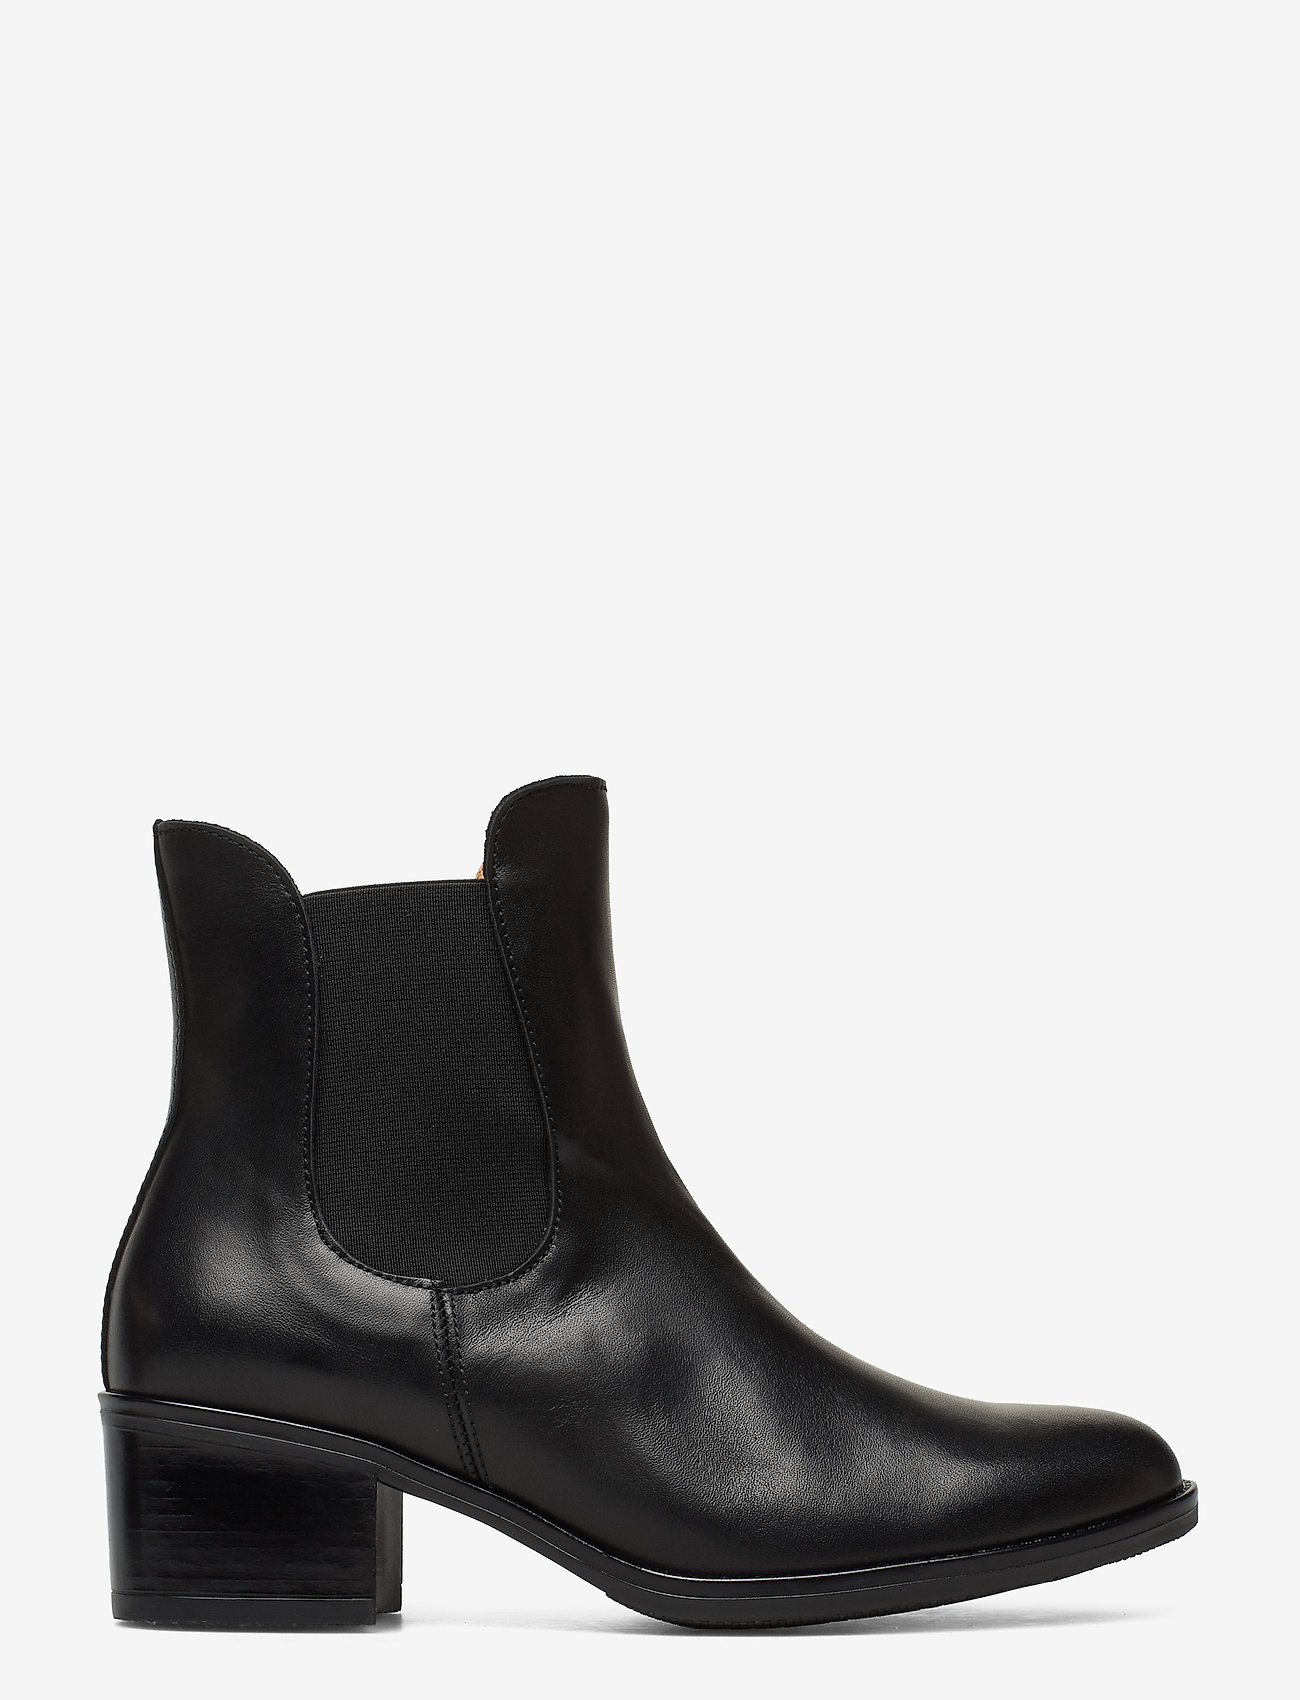 gabor black leather ankle boots